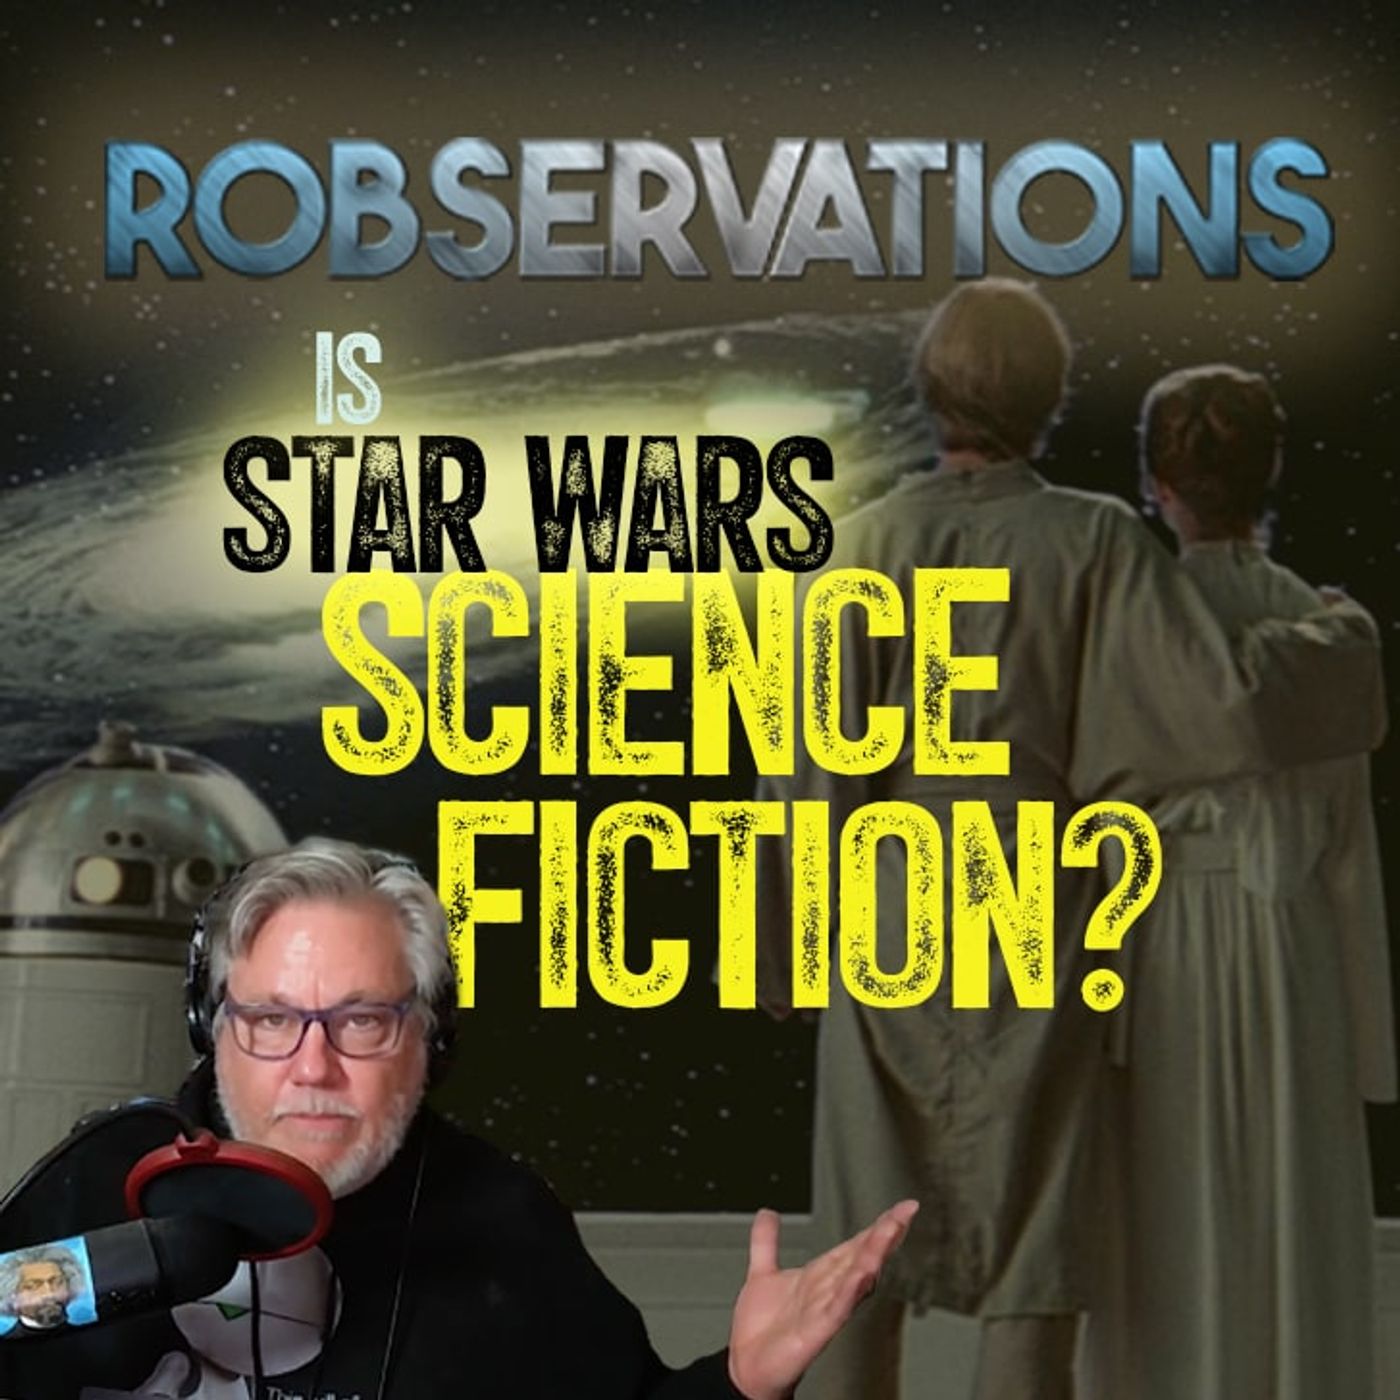 Is Star Wars real science fiction? (A Robservations Short Take)